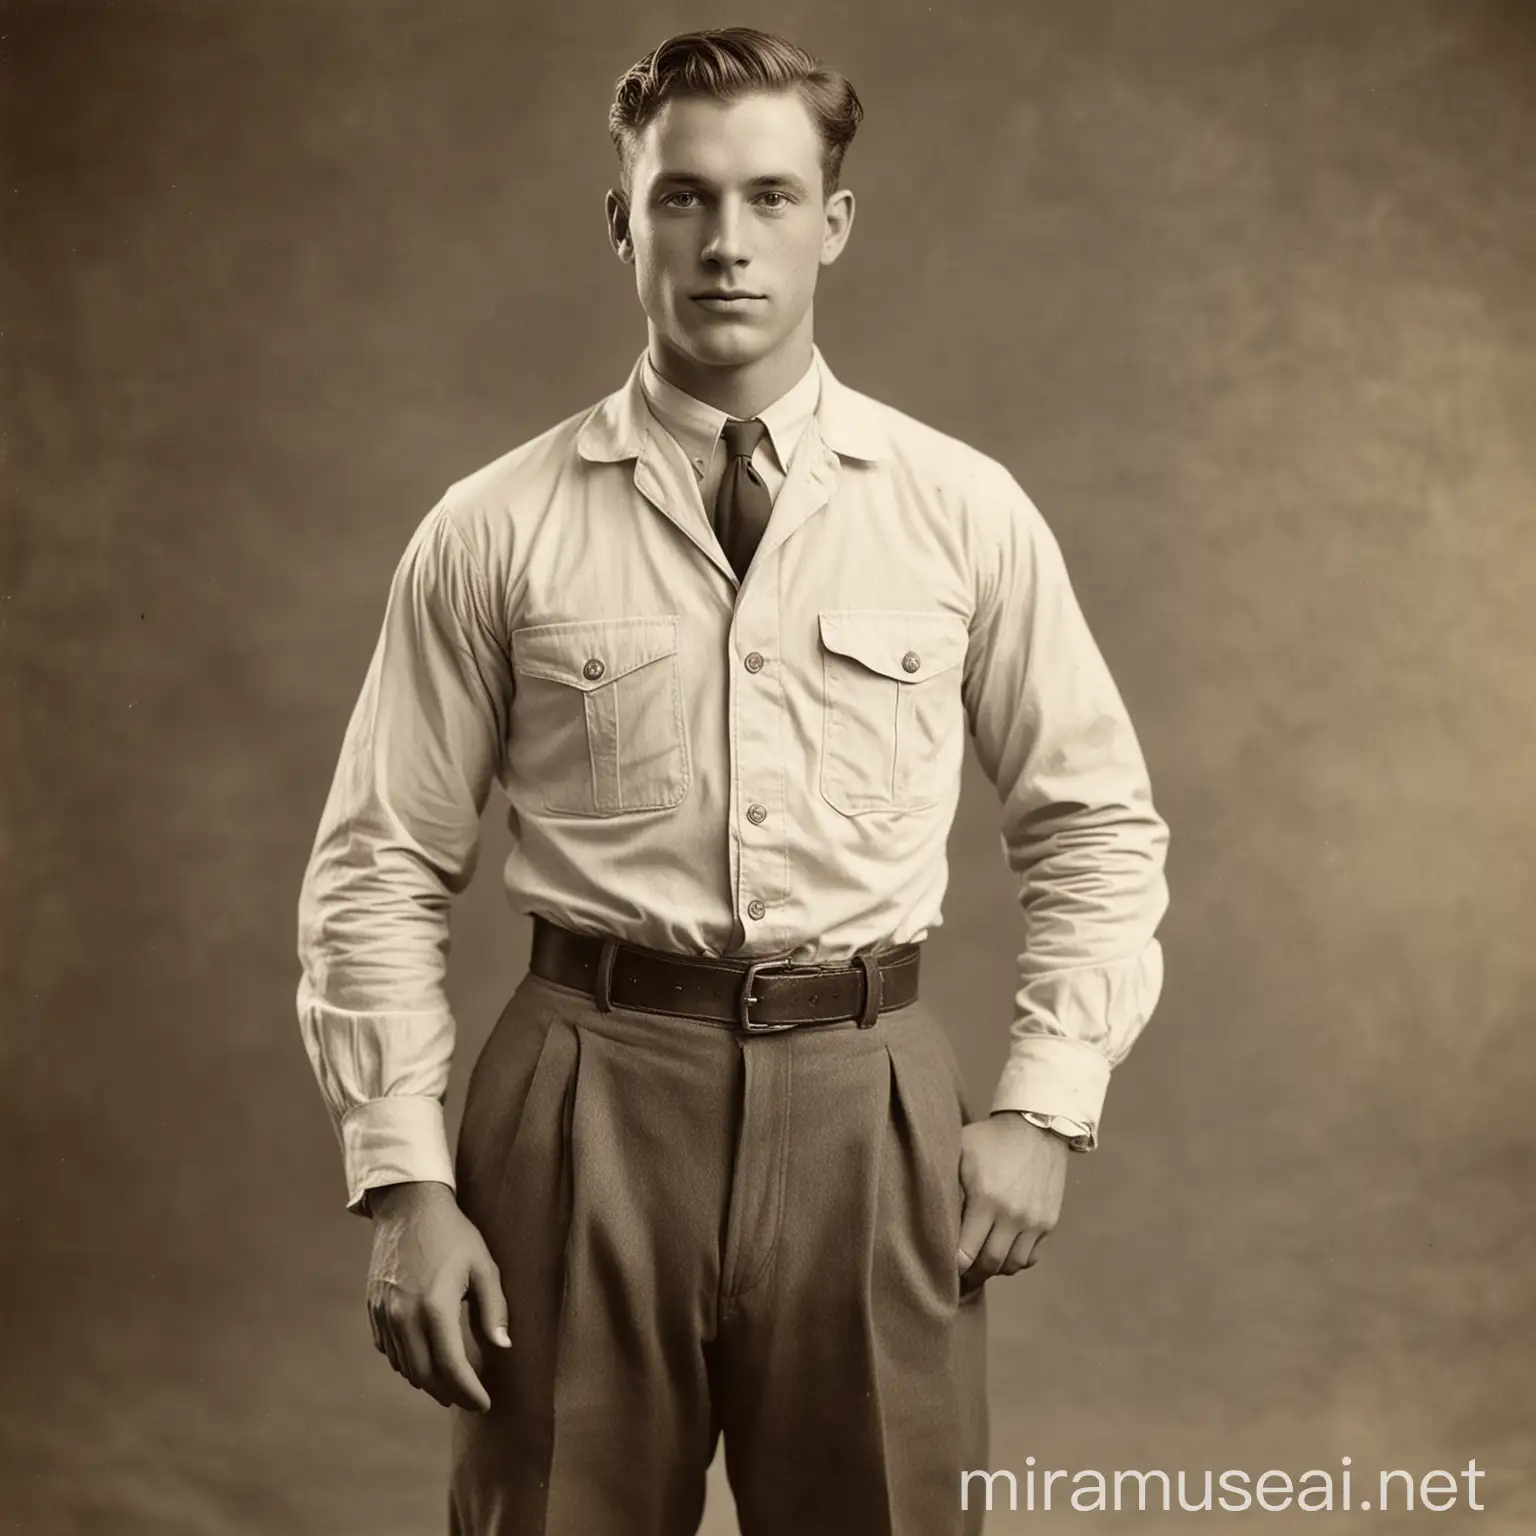 1926 Portrait of a Marine Biologist in Perfect Form